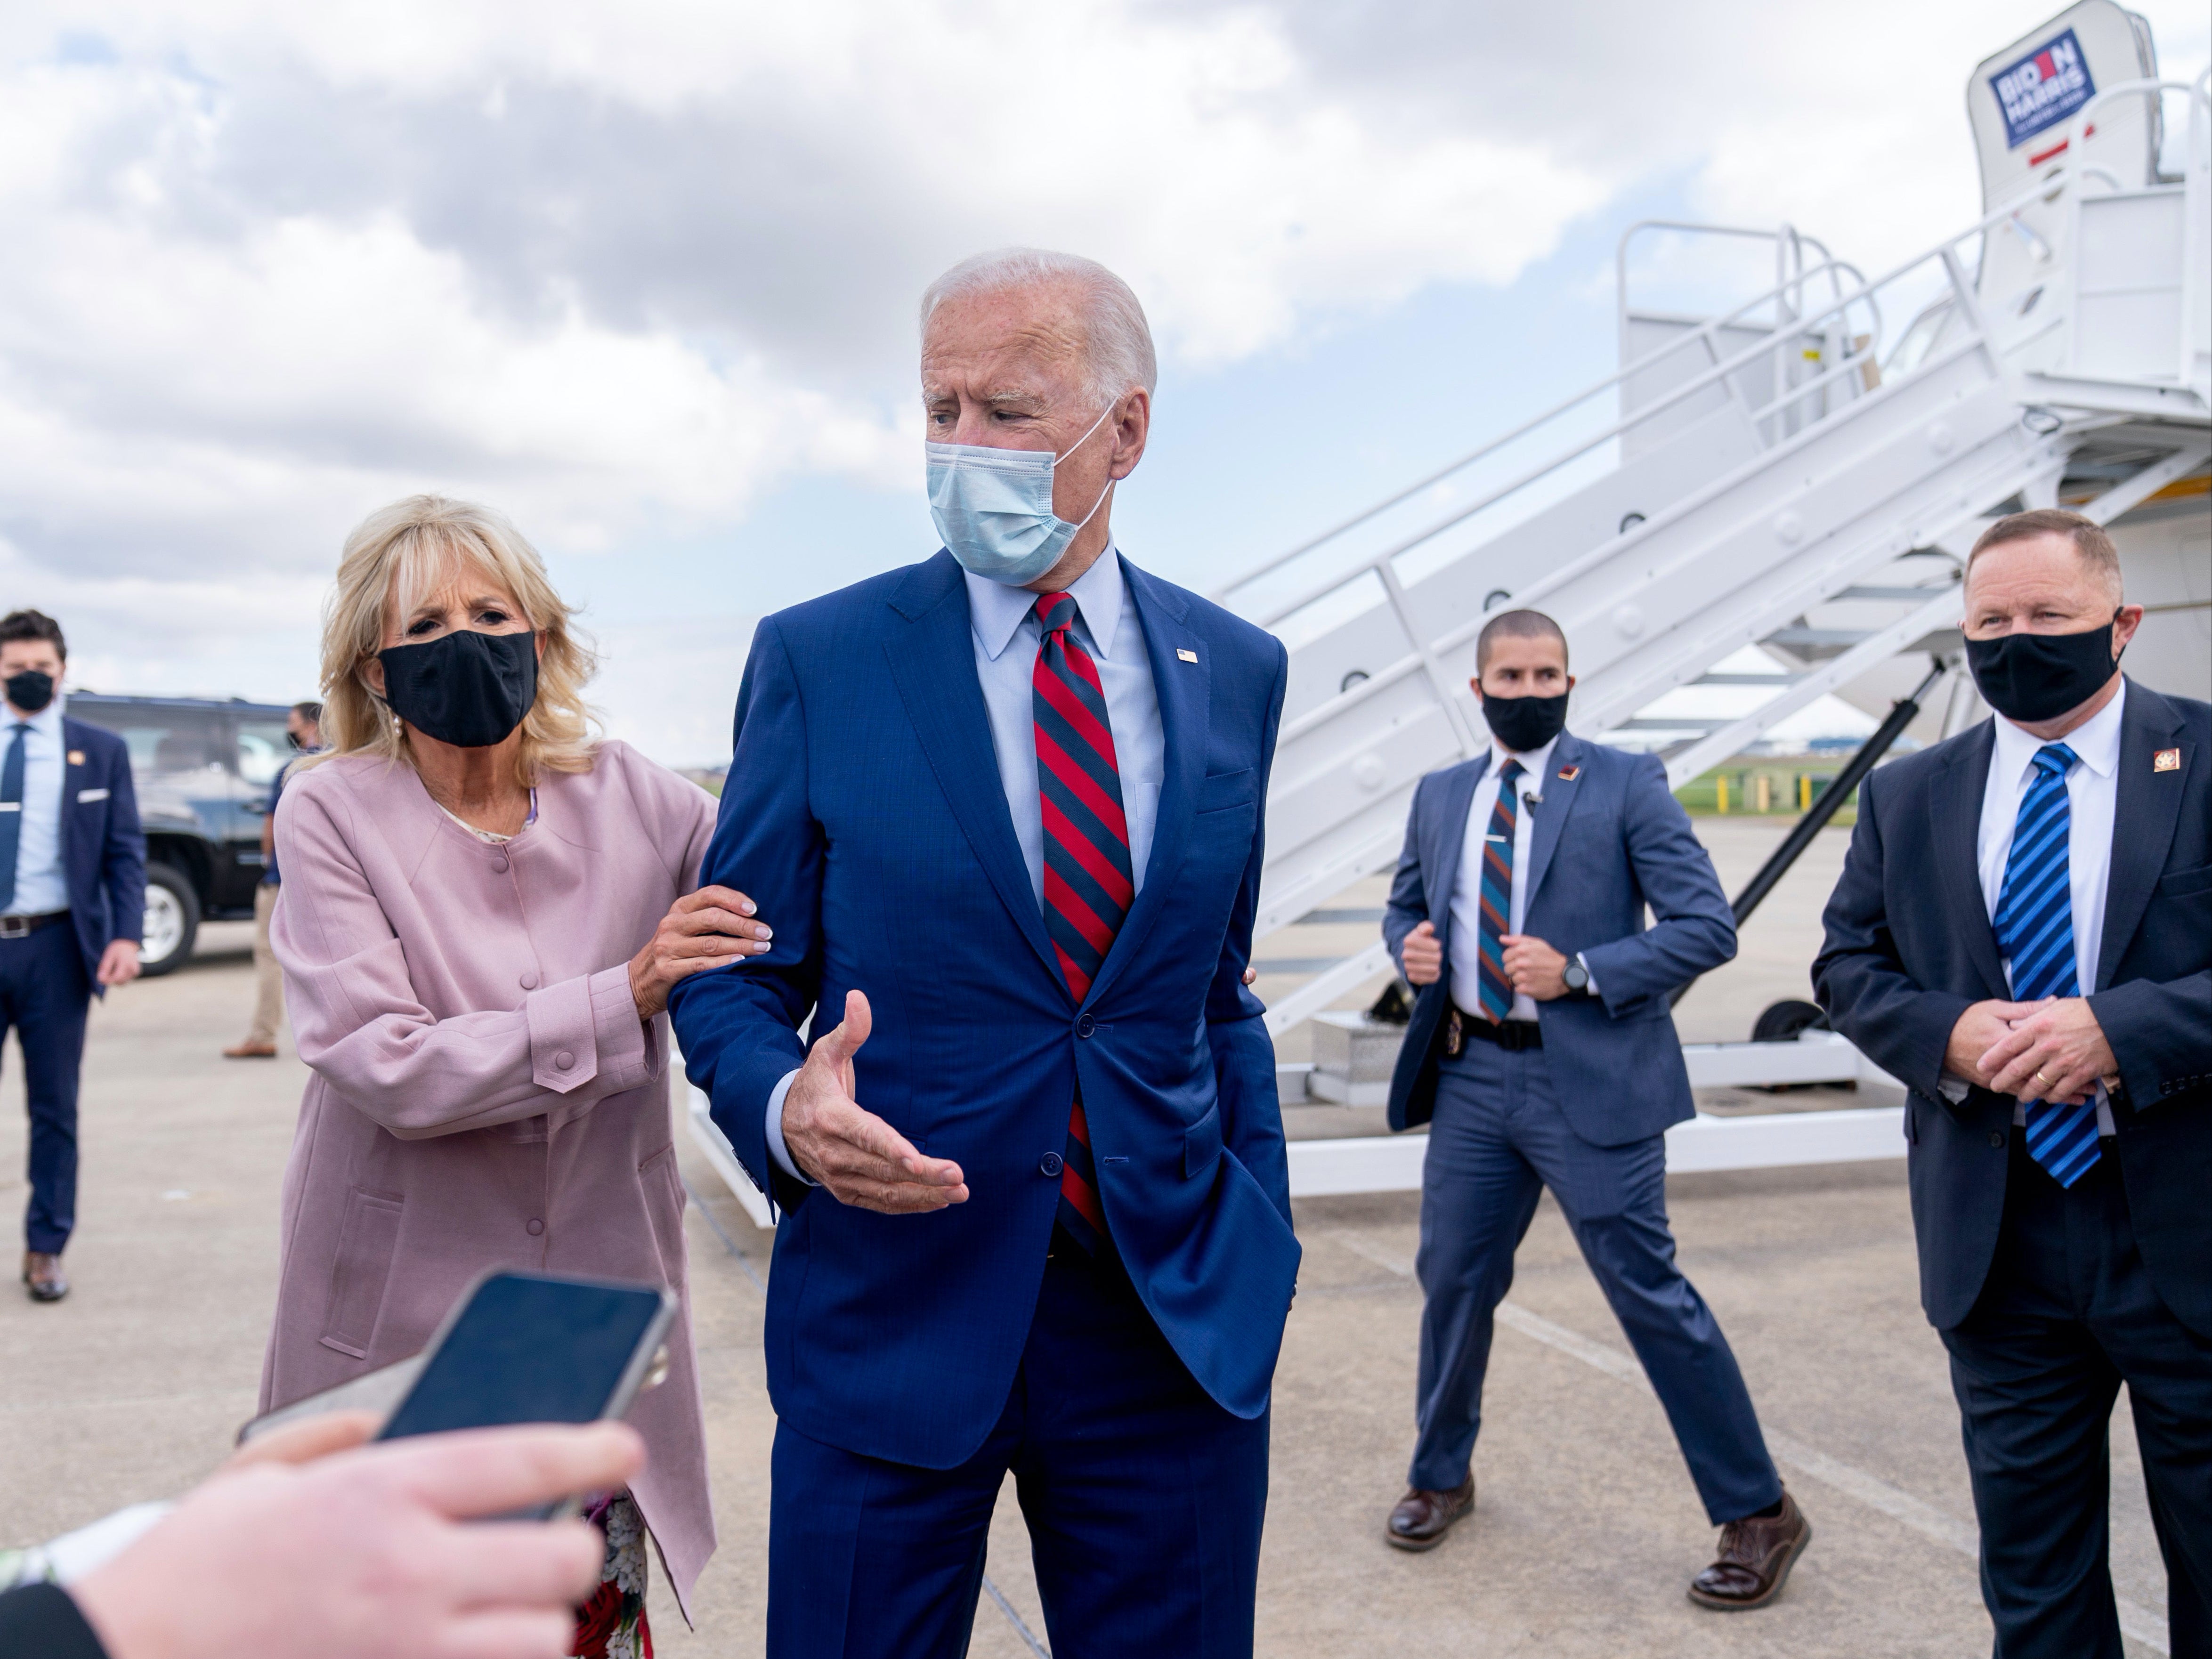 Former Vice President Joe Biden talks to reporters before a flight to Florida for campaigning.